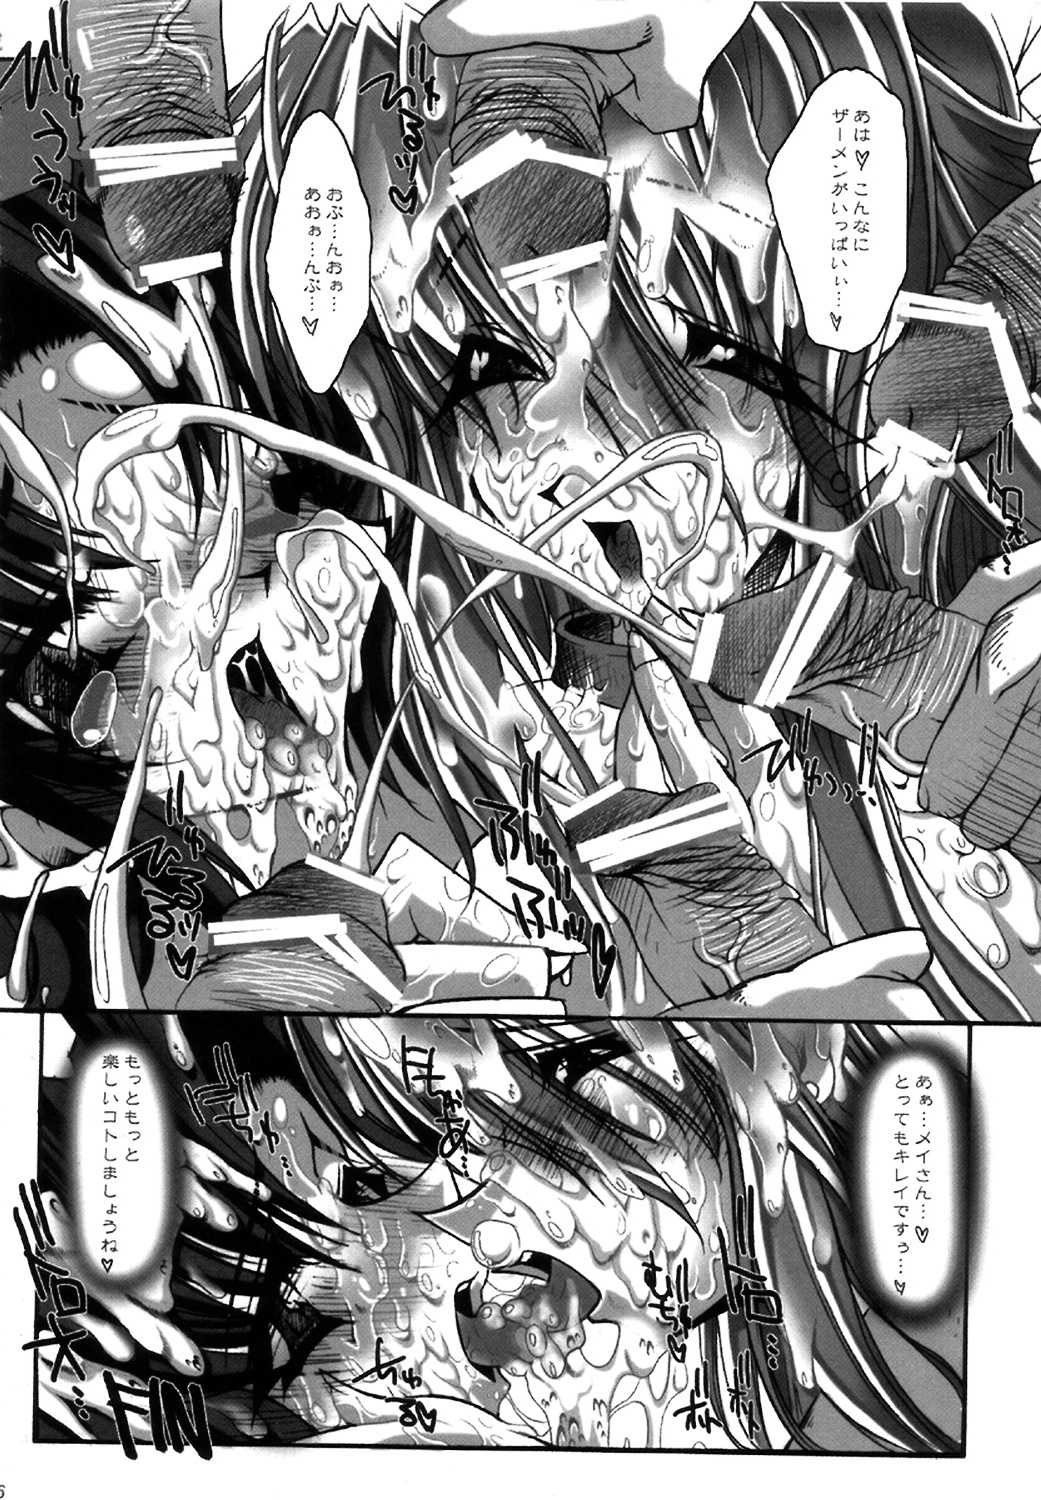 (SC22) [G-ZONE (Moroboshi Guy)] NUMBER OF THE BEAST 666 (Guilty Gear) page 25 full